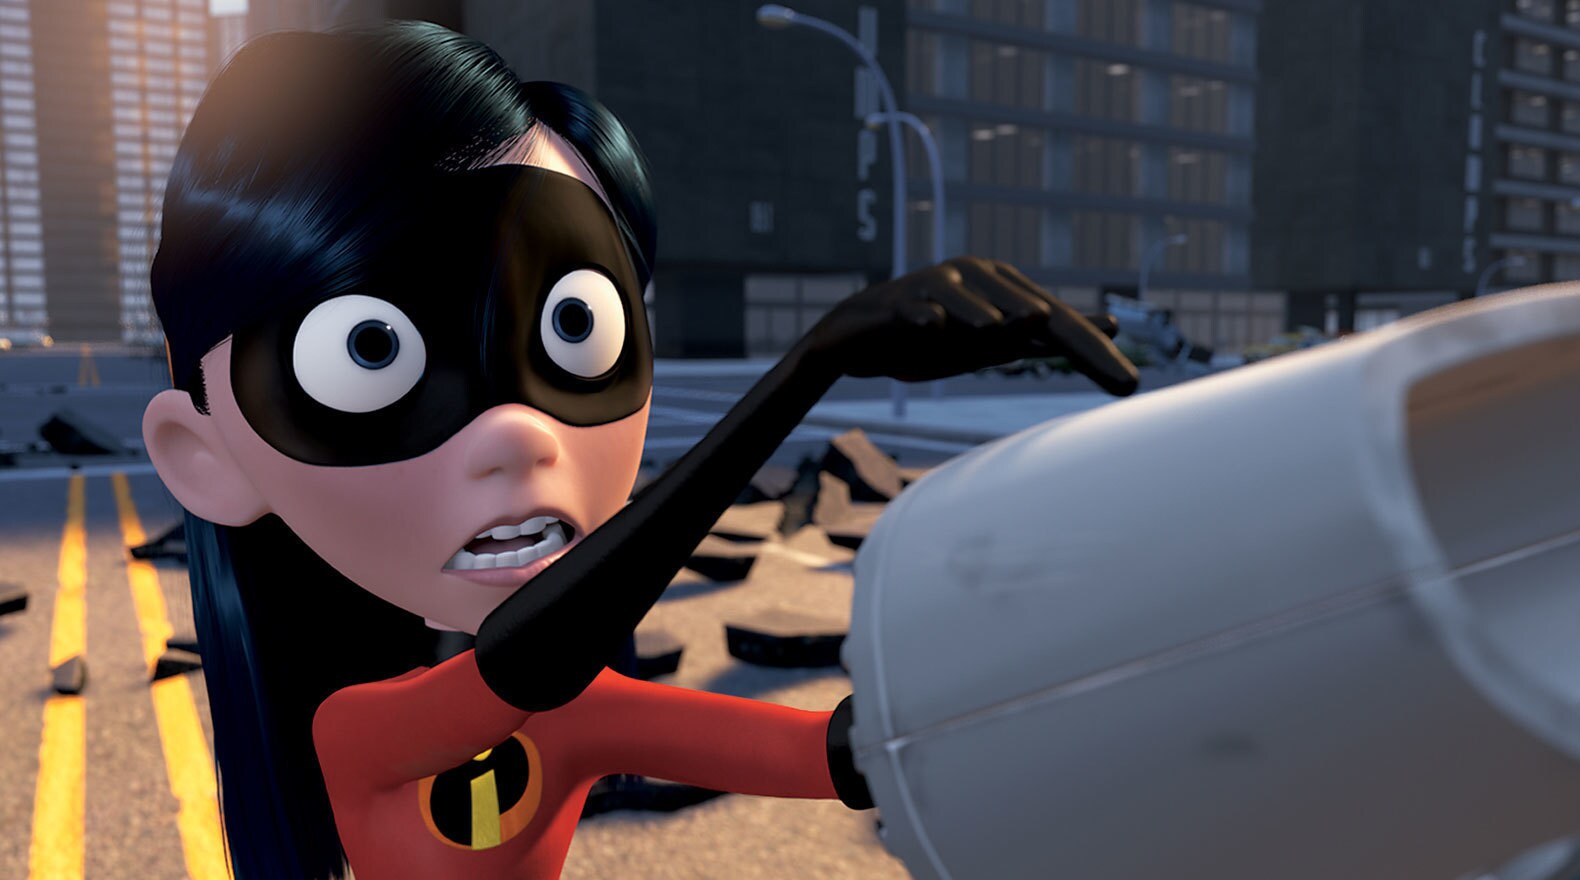 Violet Parr taking on the Omnidroid in "The Incredibles"